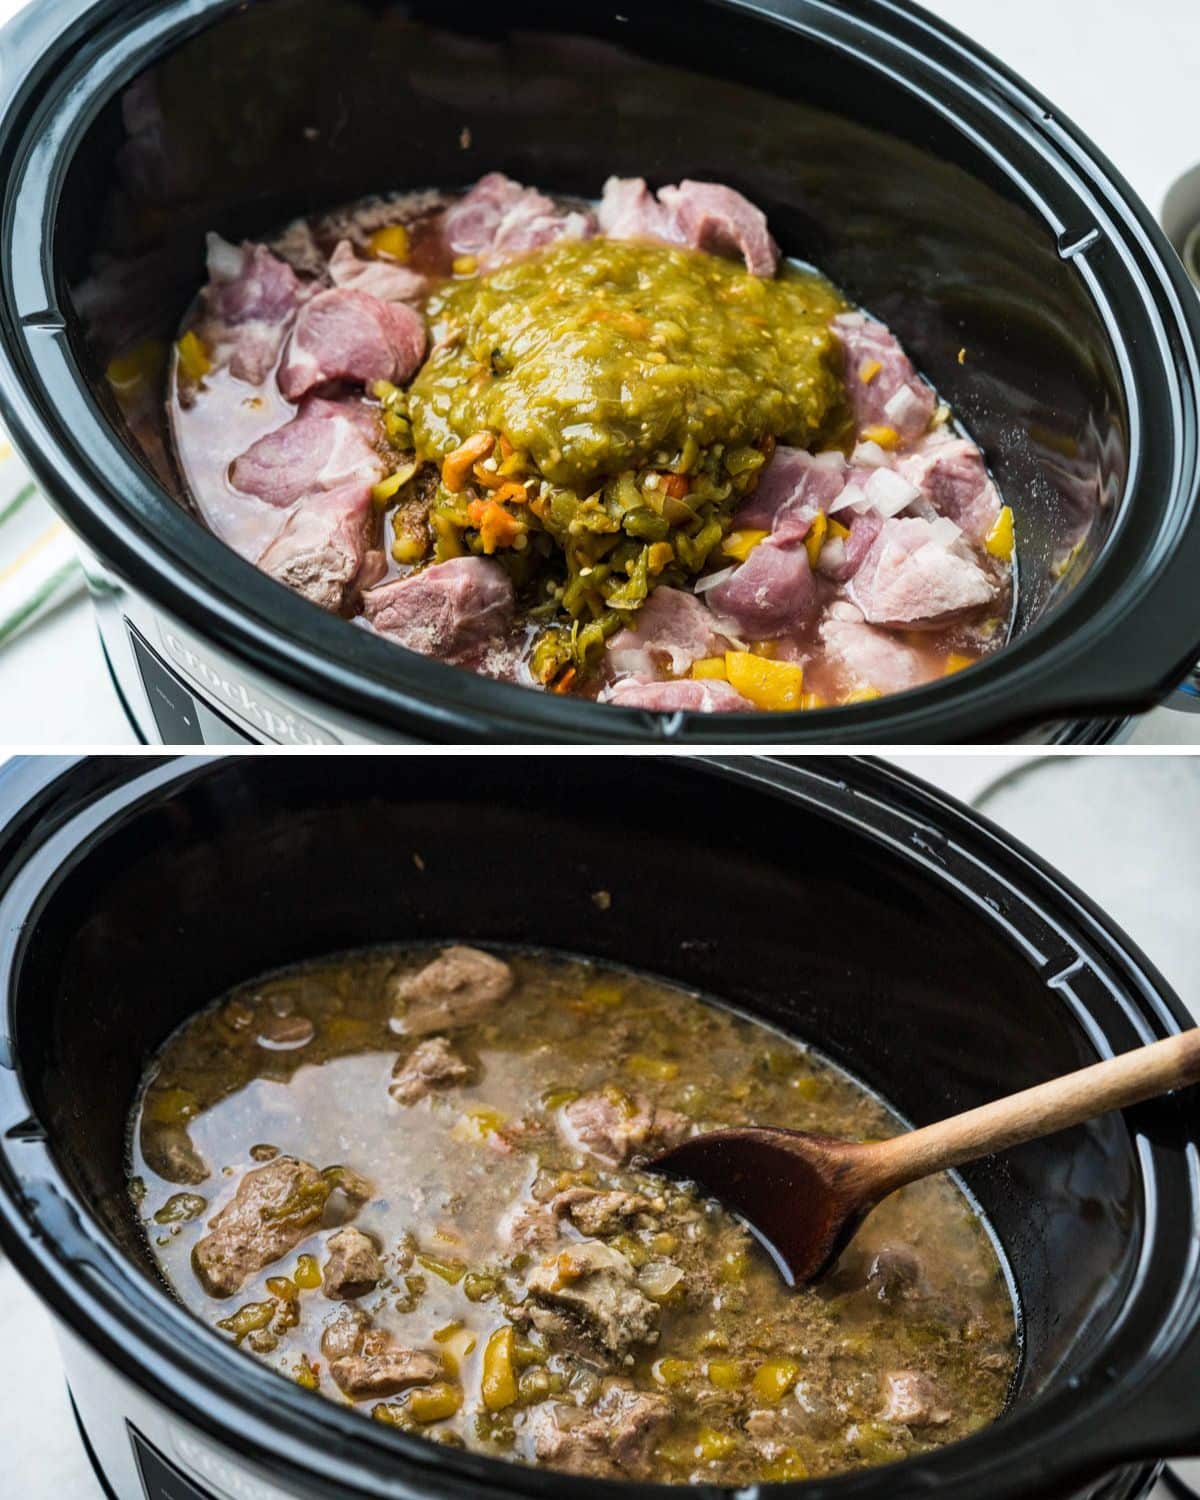 the pulled pork with hatch chiles and salsa before and after braising in the crock pot.